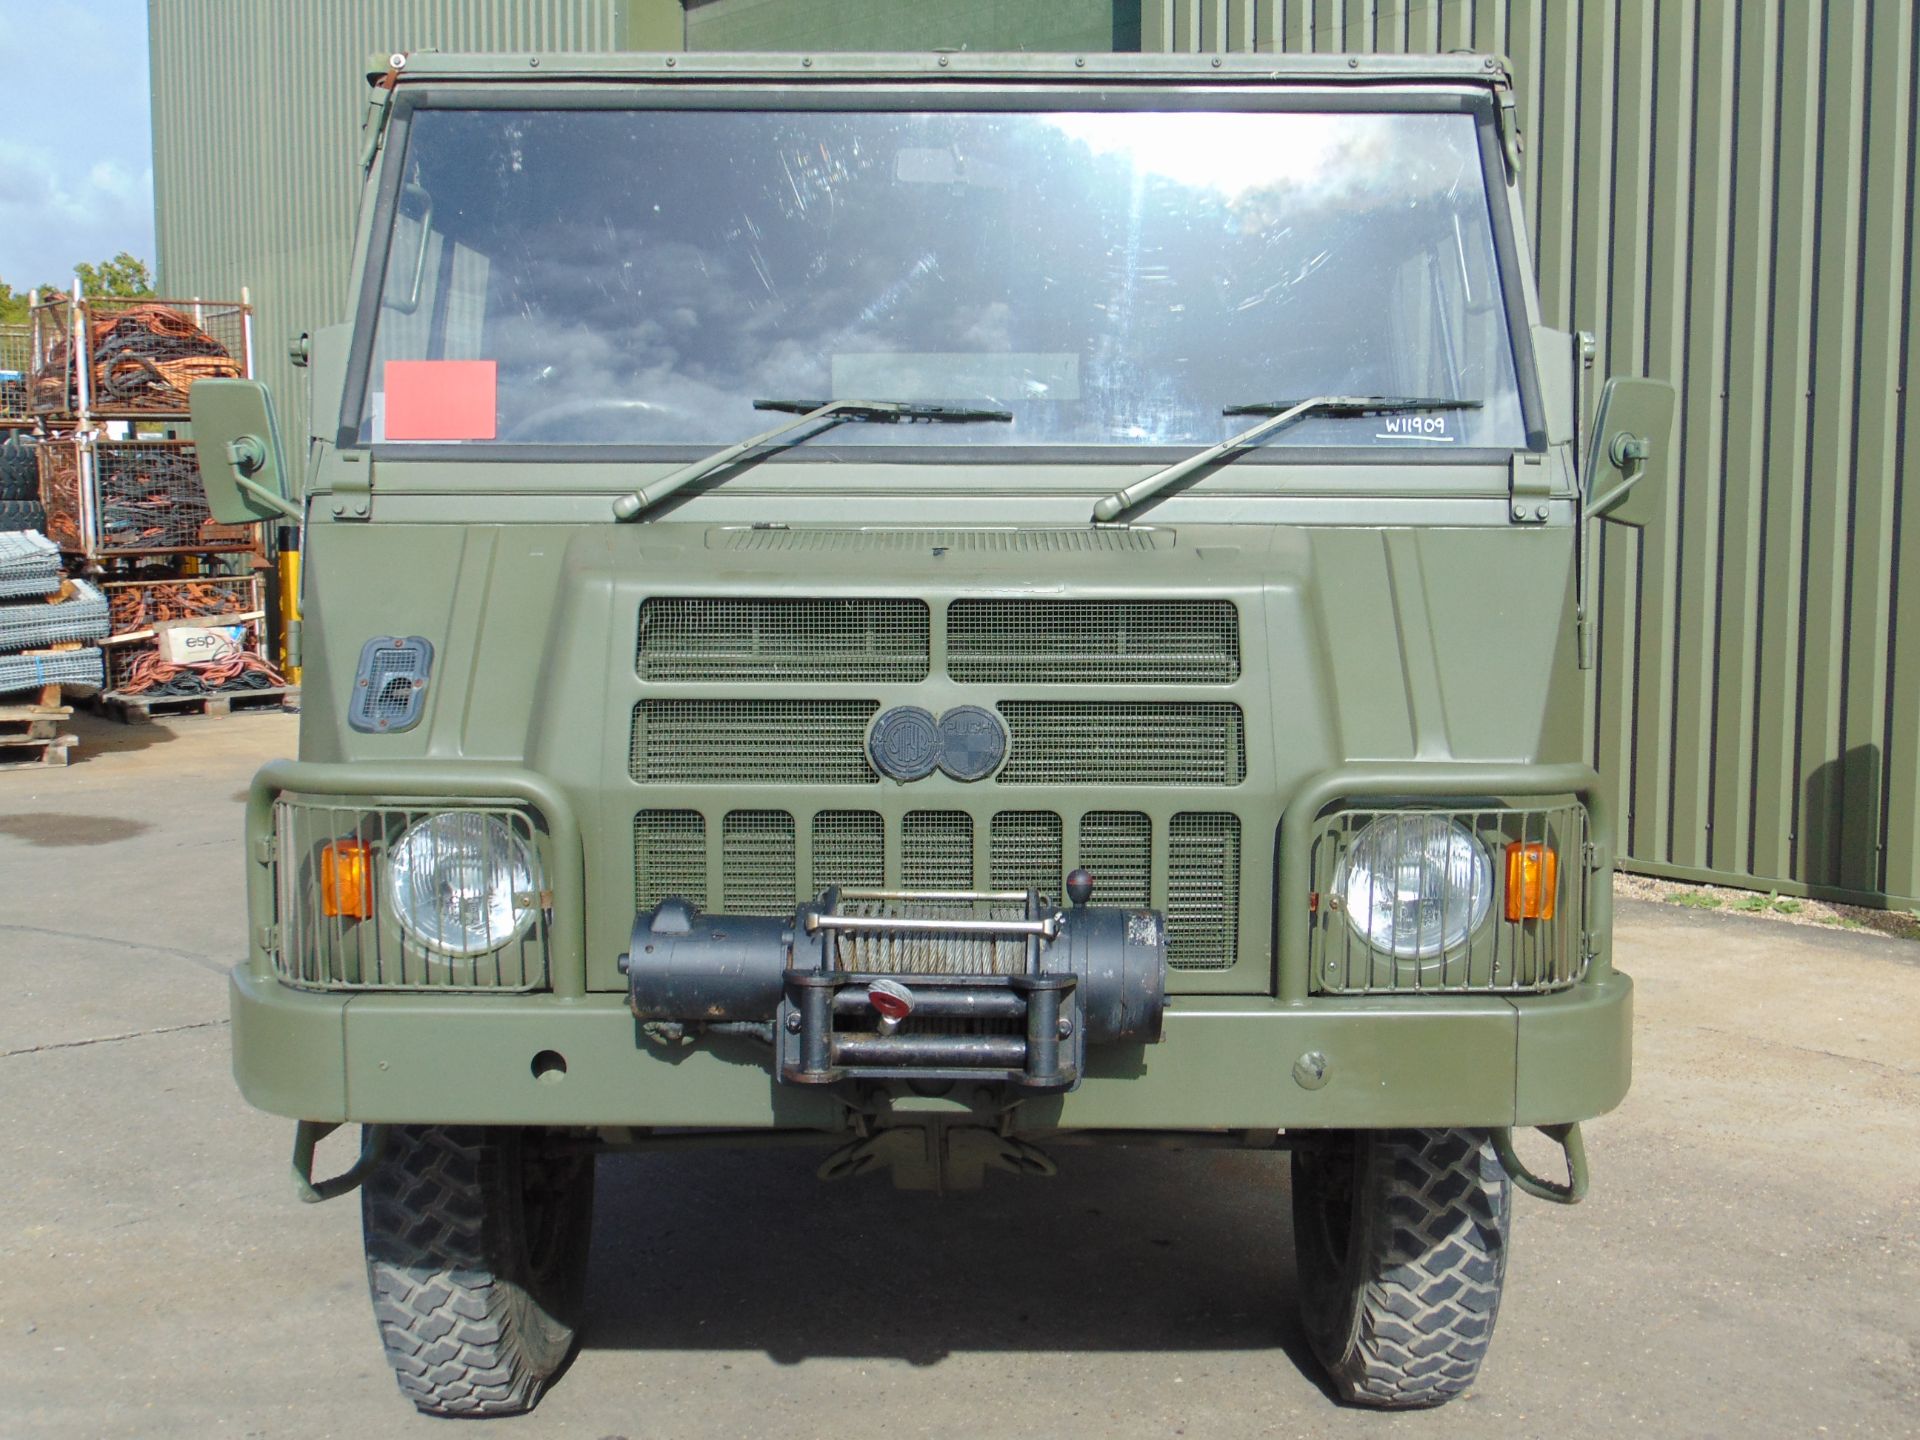 Military Specification Pinzgauer 716 4X4 Soft Top ONLY 26,686 MILES! - Image 3 of 36